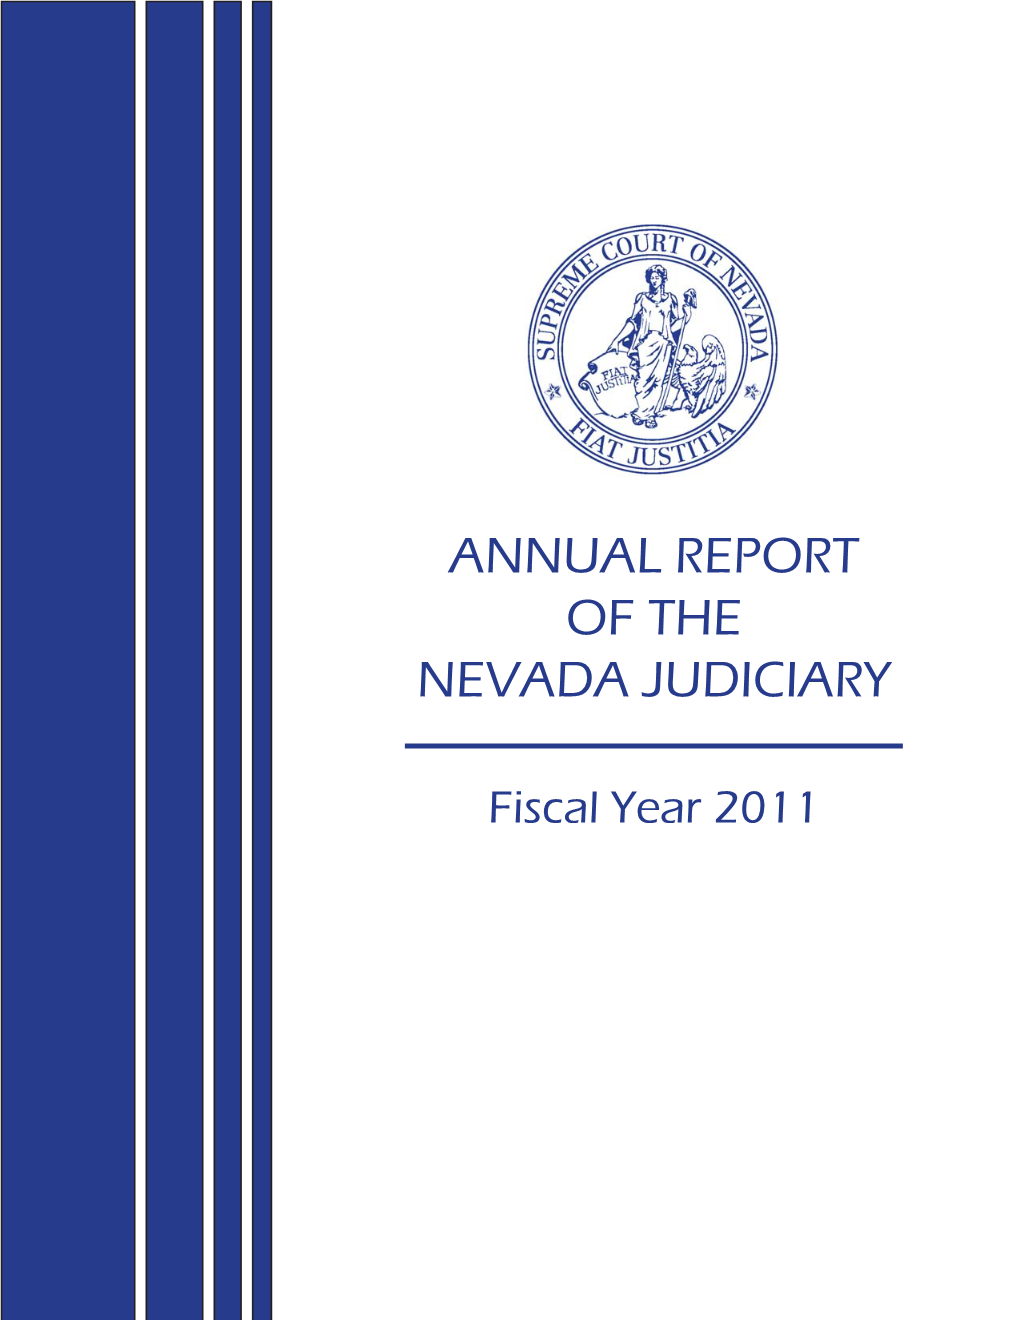 2011 Annual Report of the Nevada Judiciary Fiscal Year 2011